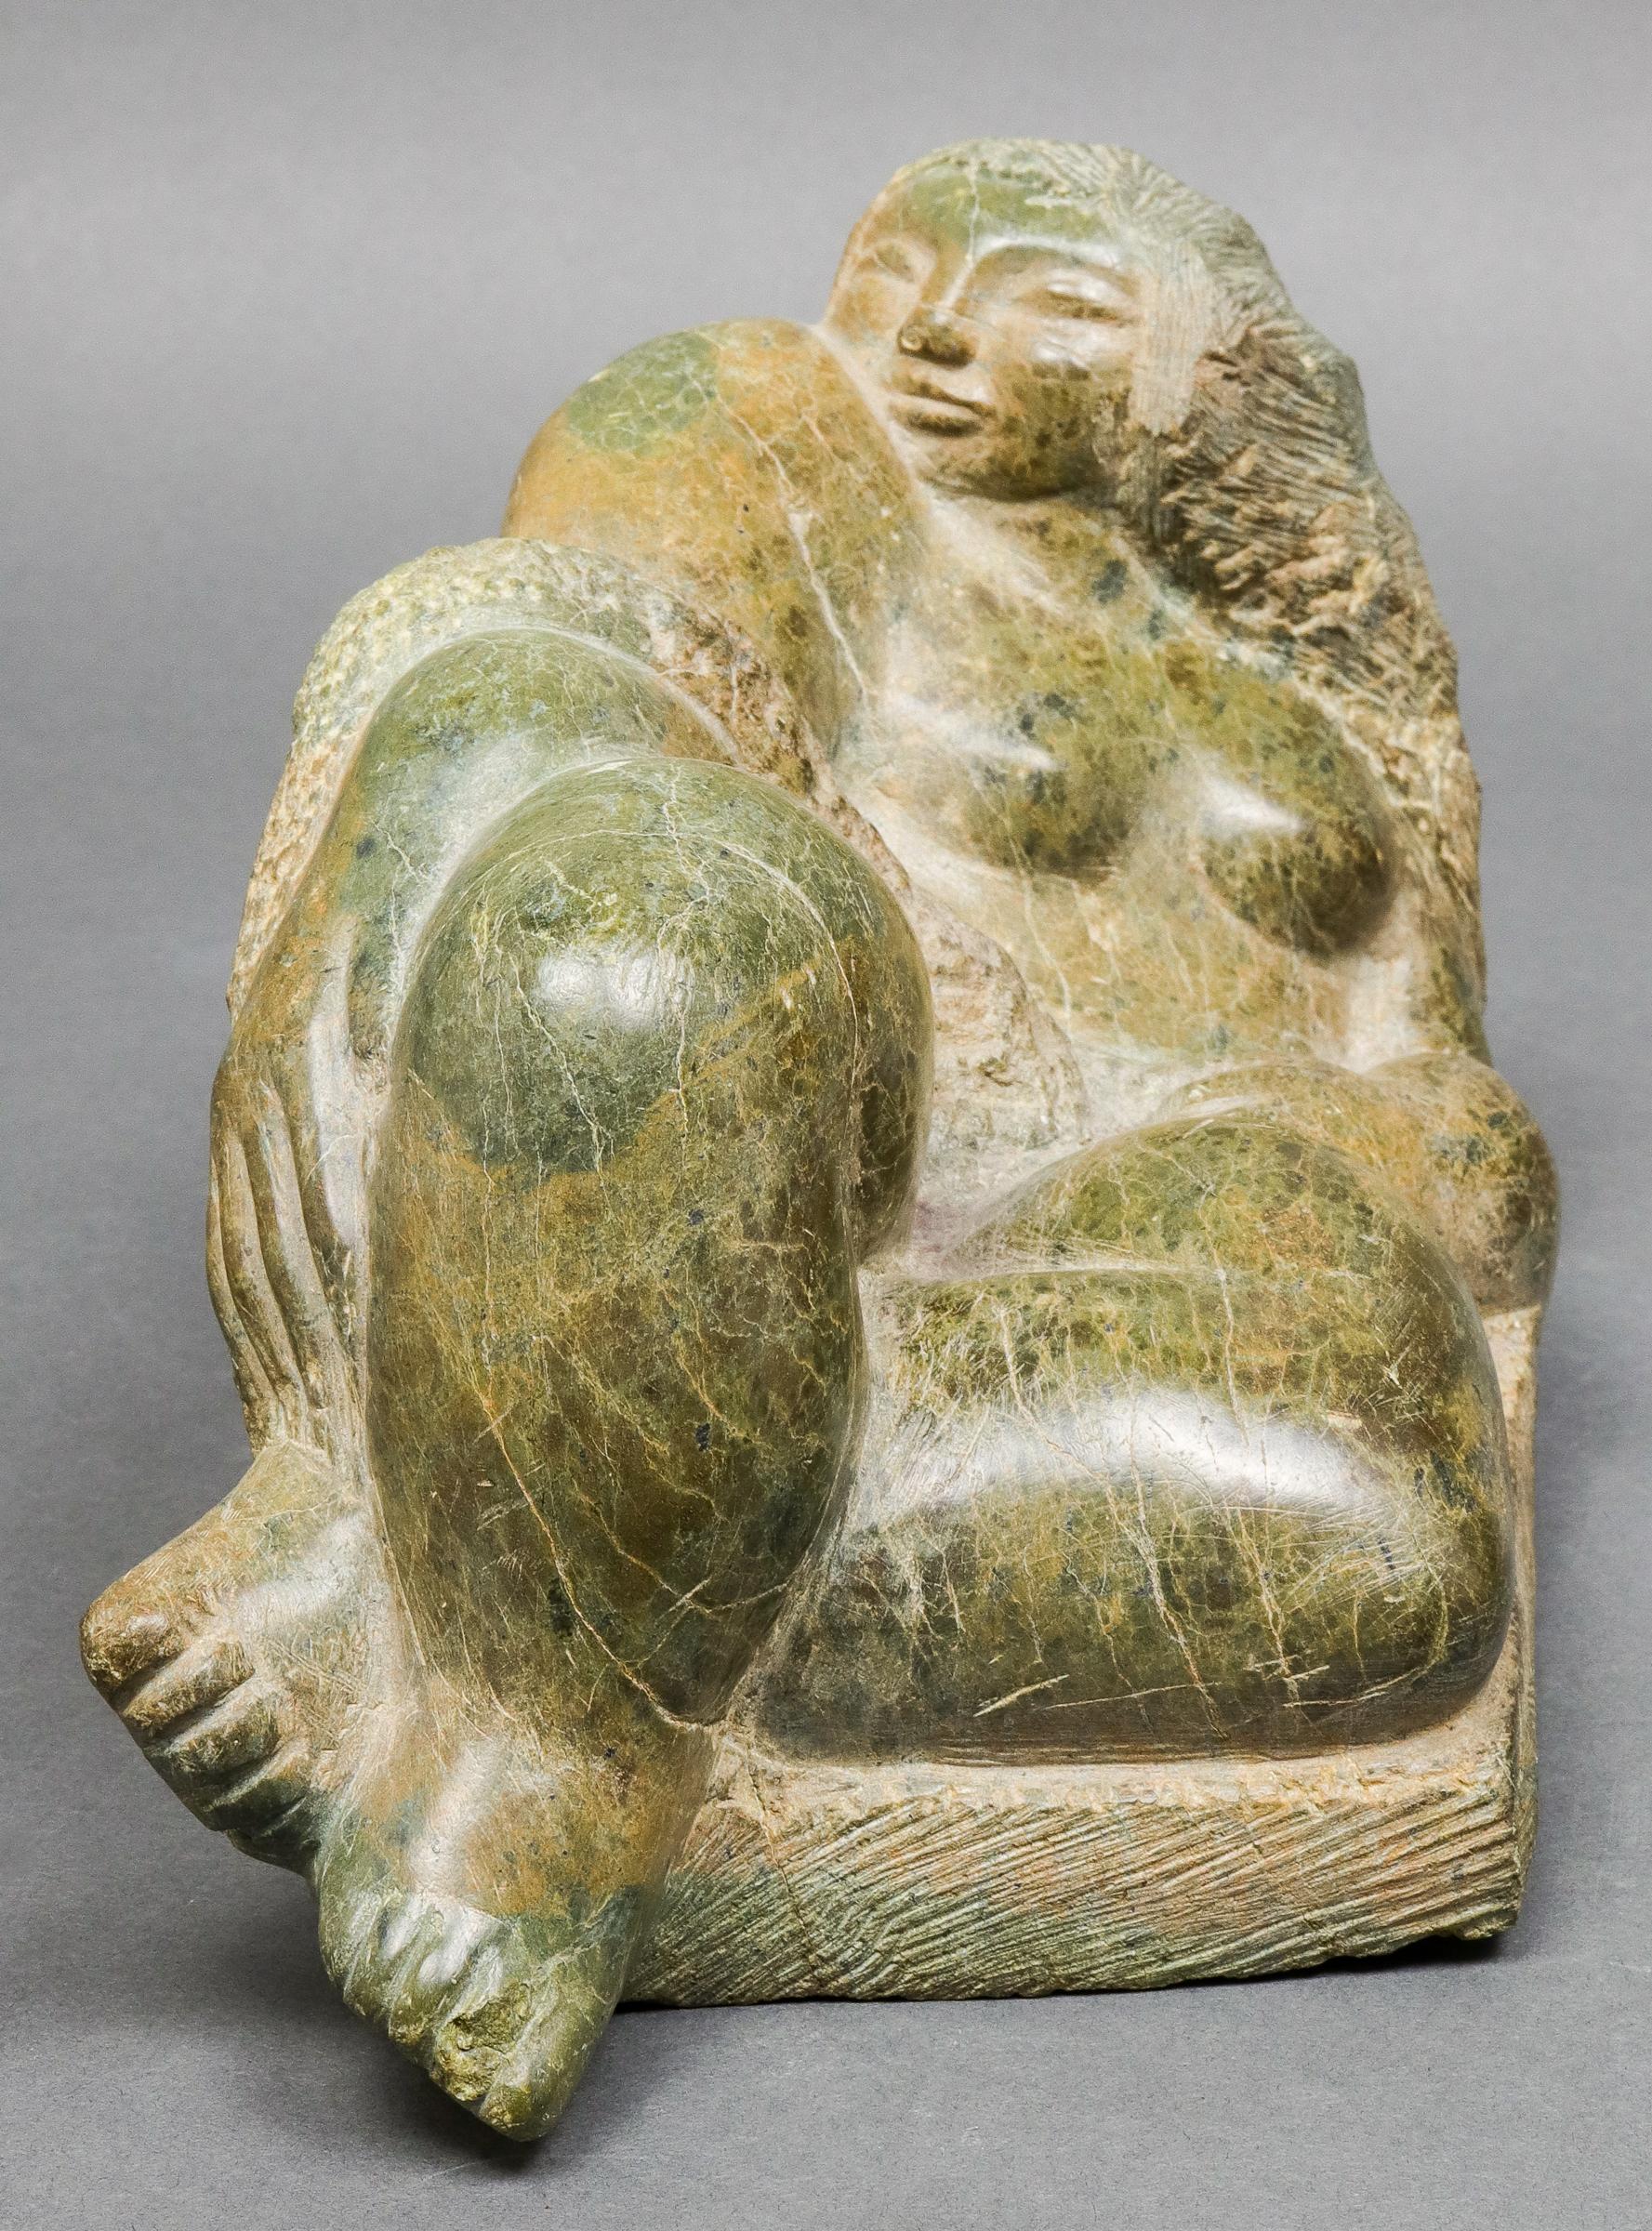 Modern sculpture of a reclining female nude carved in green serpentine stone, made by Spanish-born American artist José Mariano de Creeft, (1884-1982). The piece is unsigned and remains in remarkable vintage condition with age-appropriate wear and